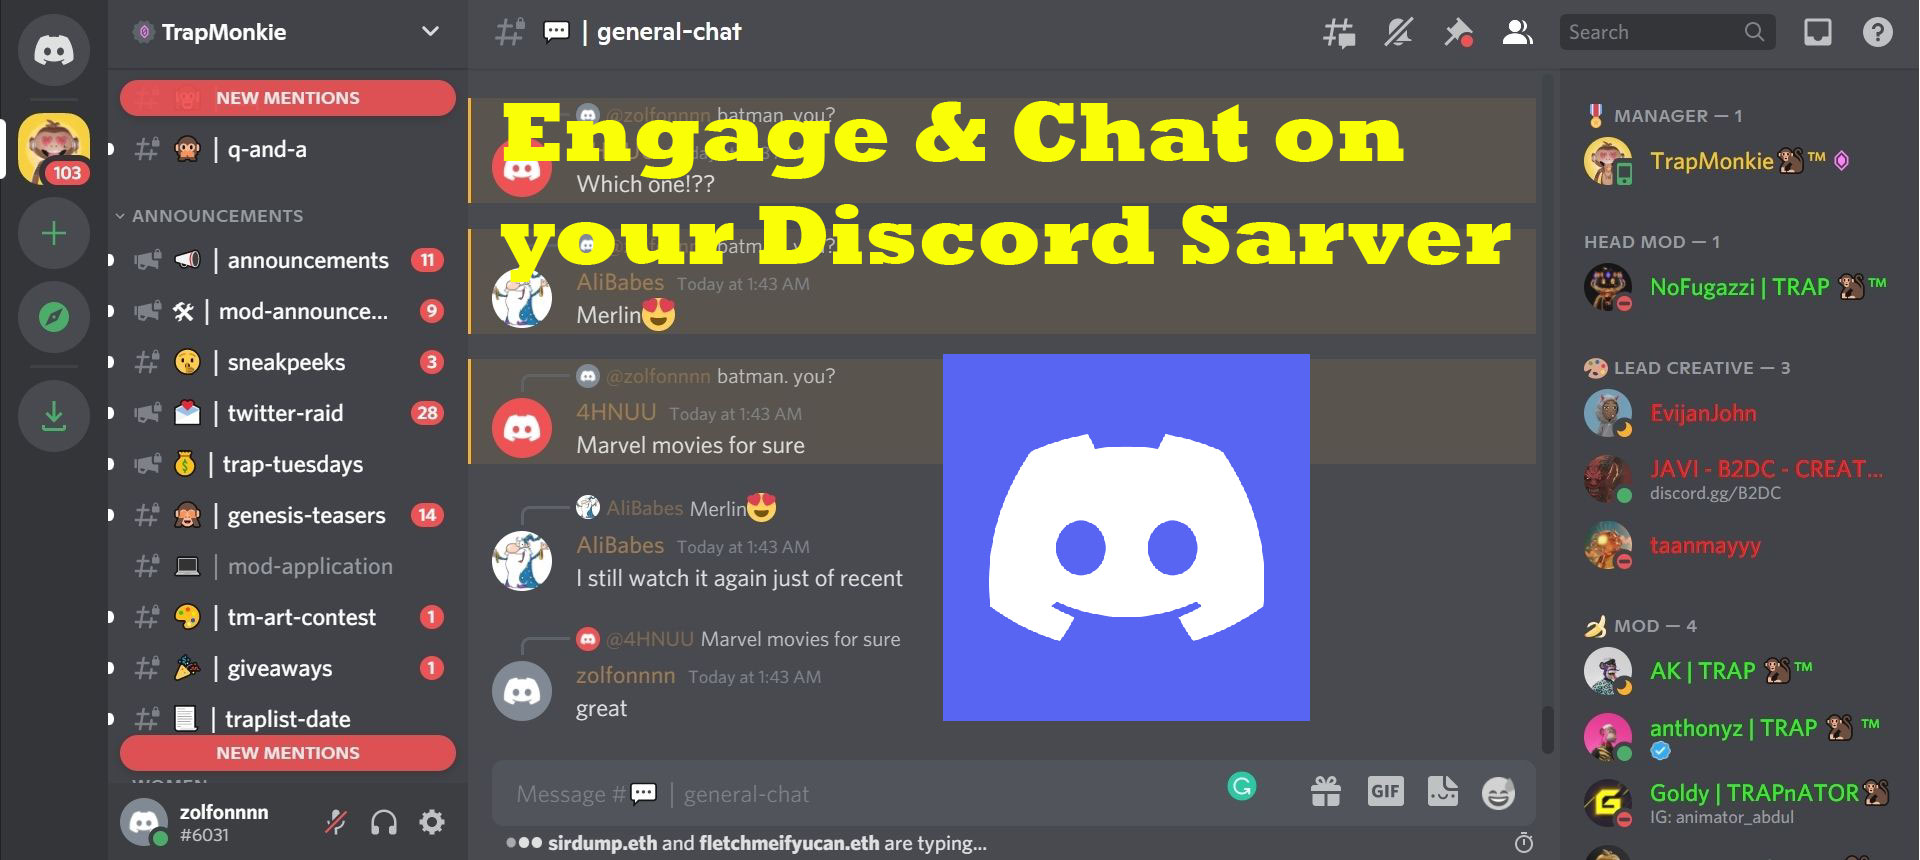 I will engage and actively chat on your discord server